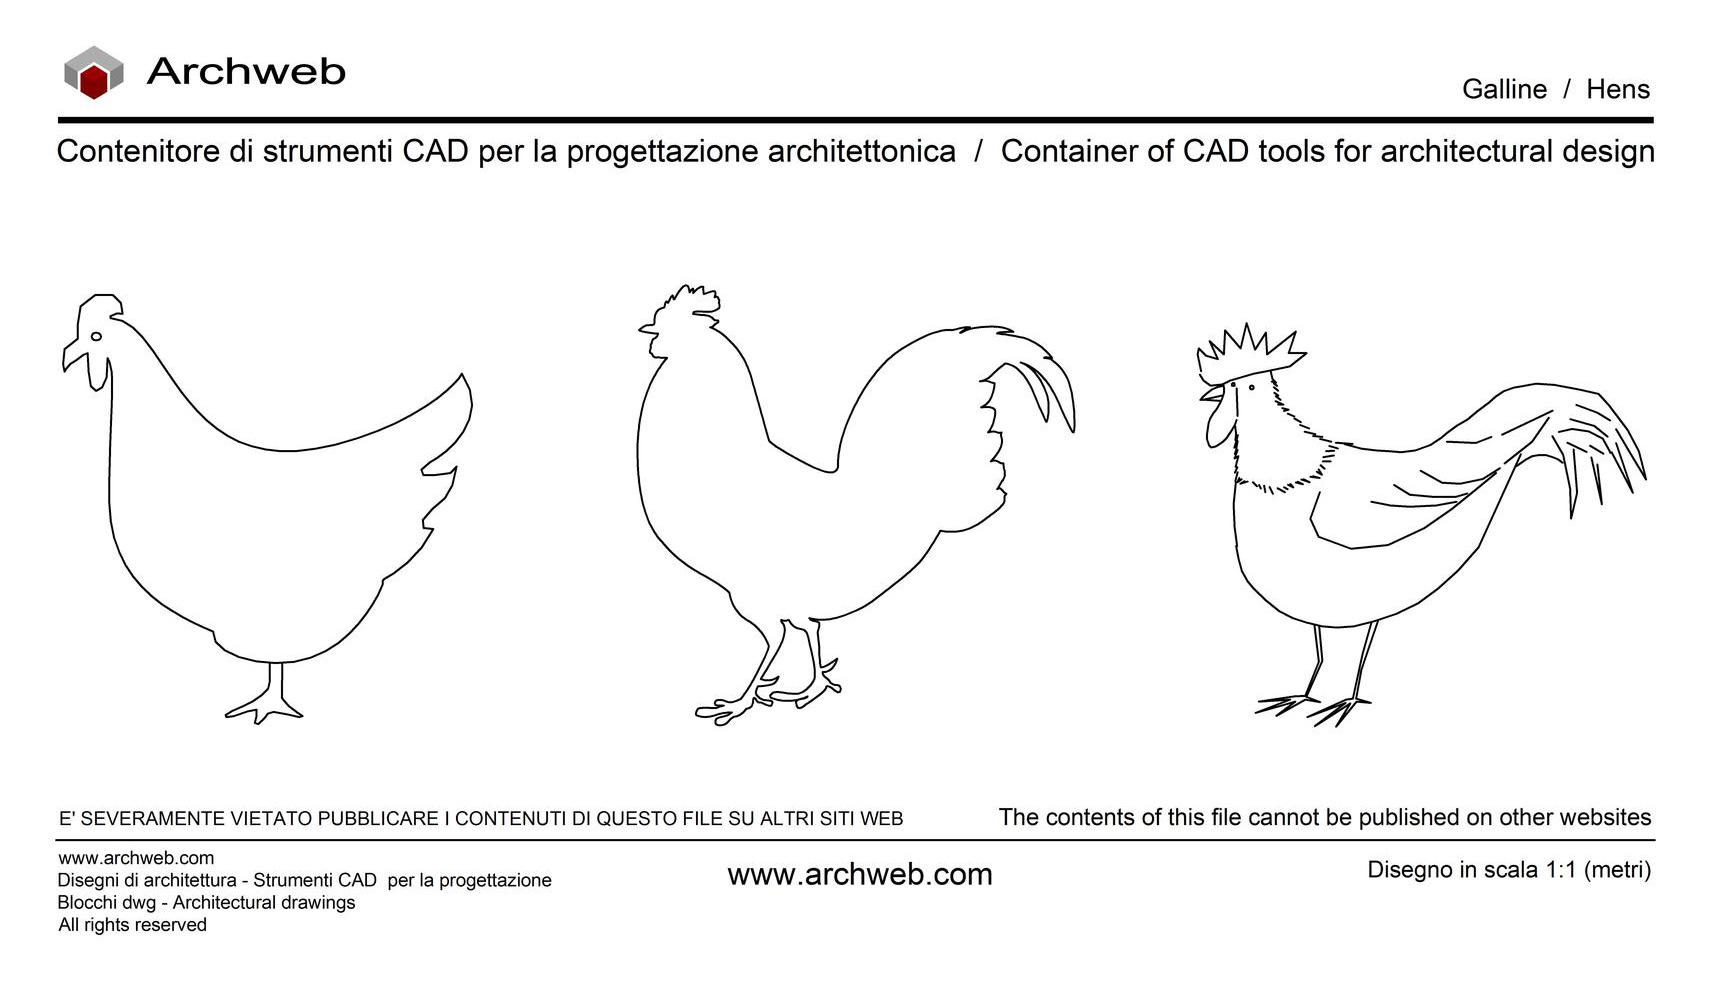 Hens images dwg Archweb